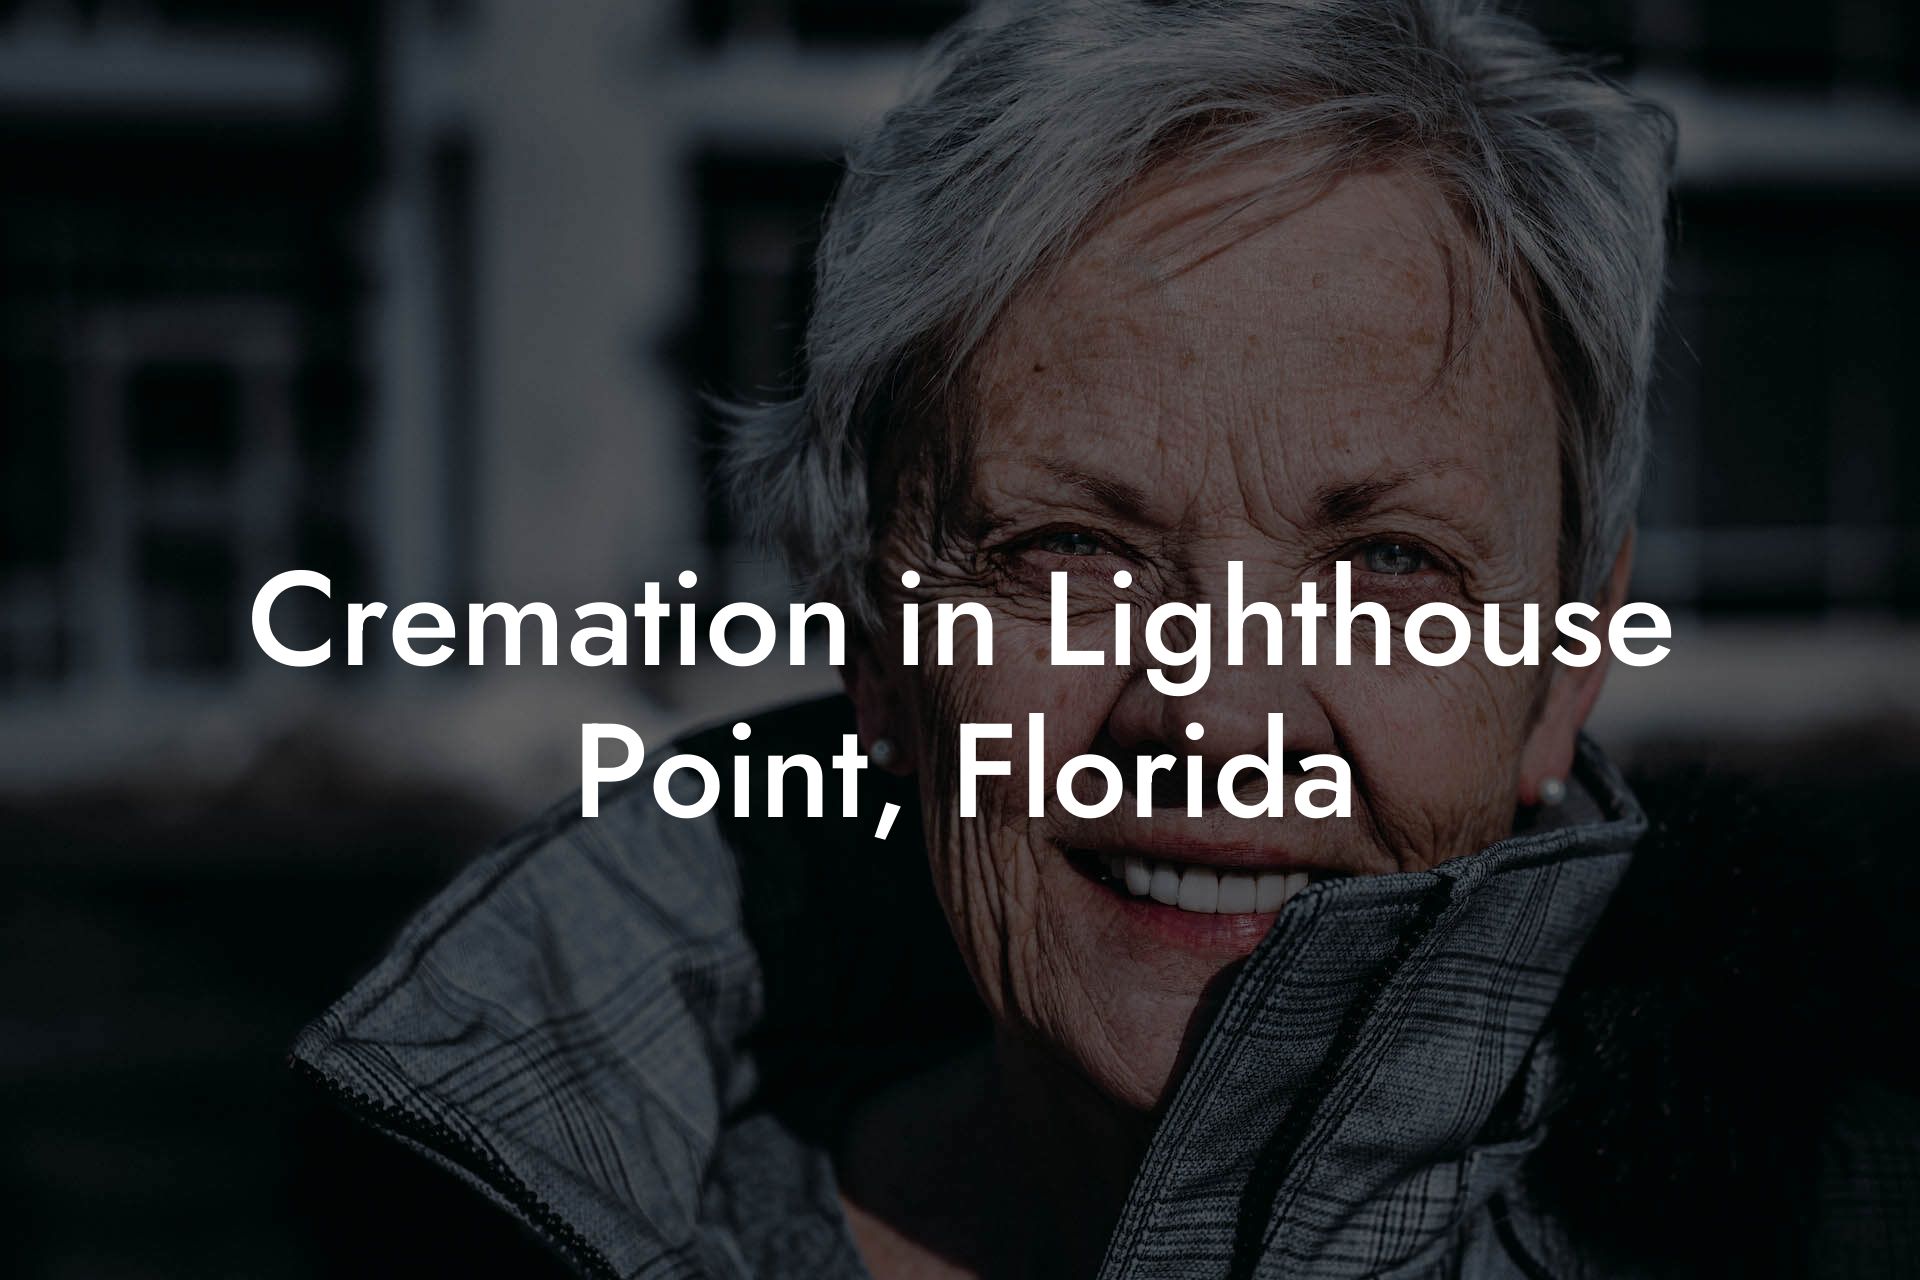 Cremation in Lighthouse Point, Florida